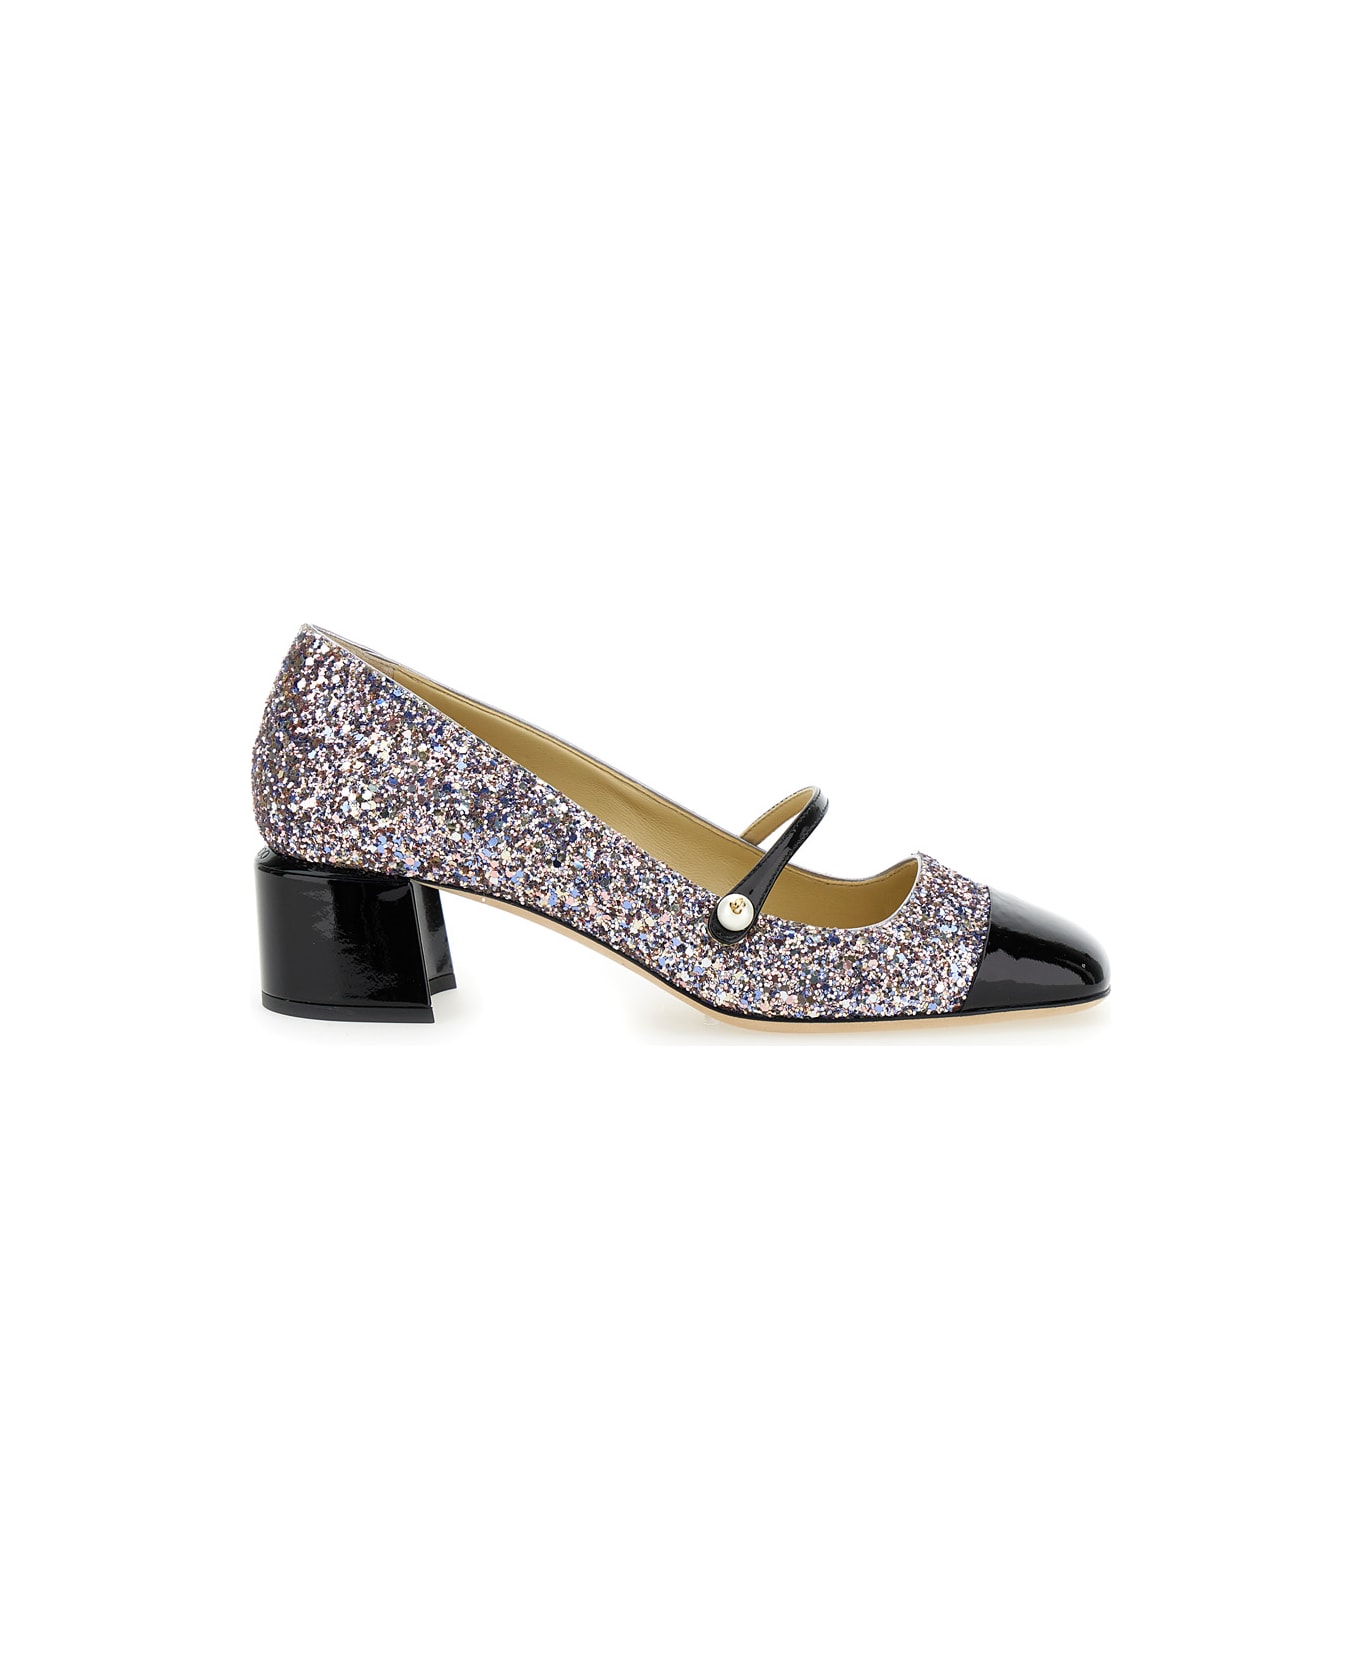 Jimmy Choo 'elisa 45' Multicolor Pumps With Block Heel In Glitter Fabric And Patent Leather Woman - Multicolor